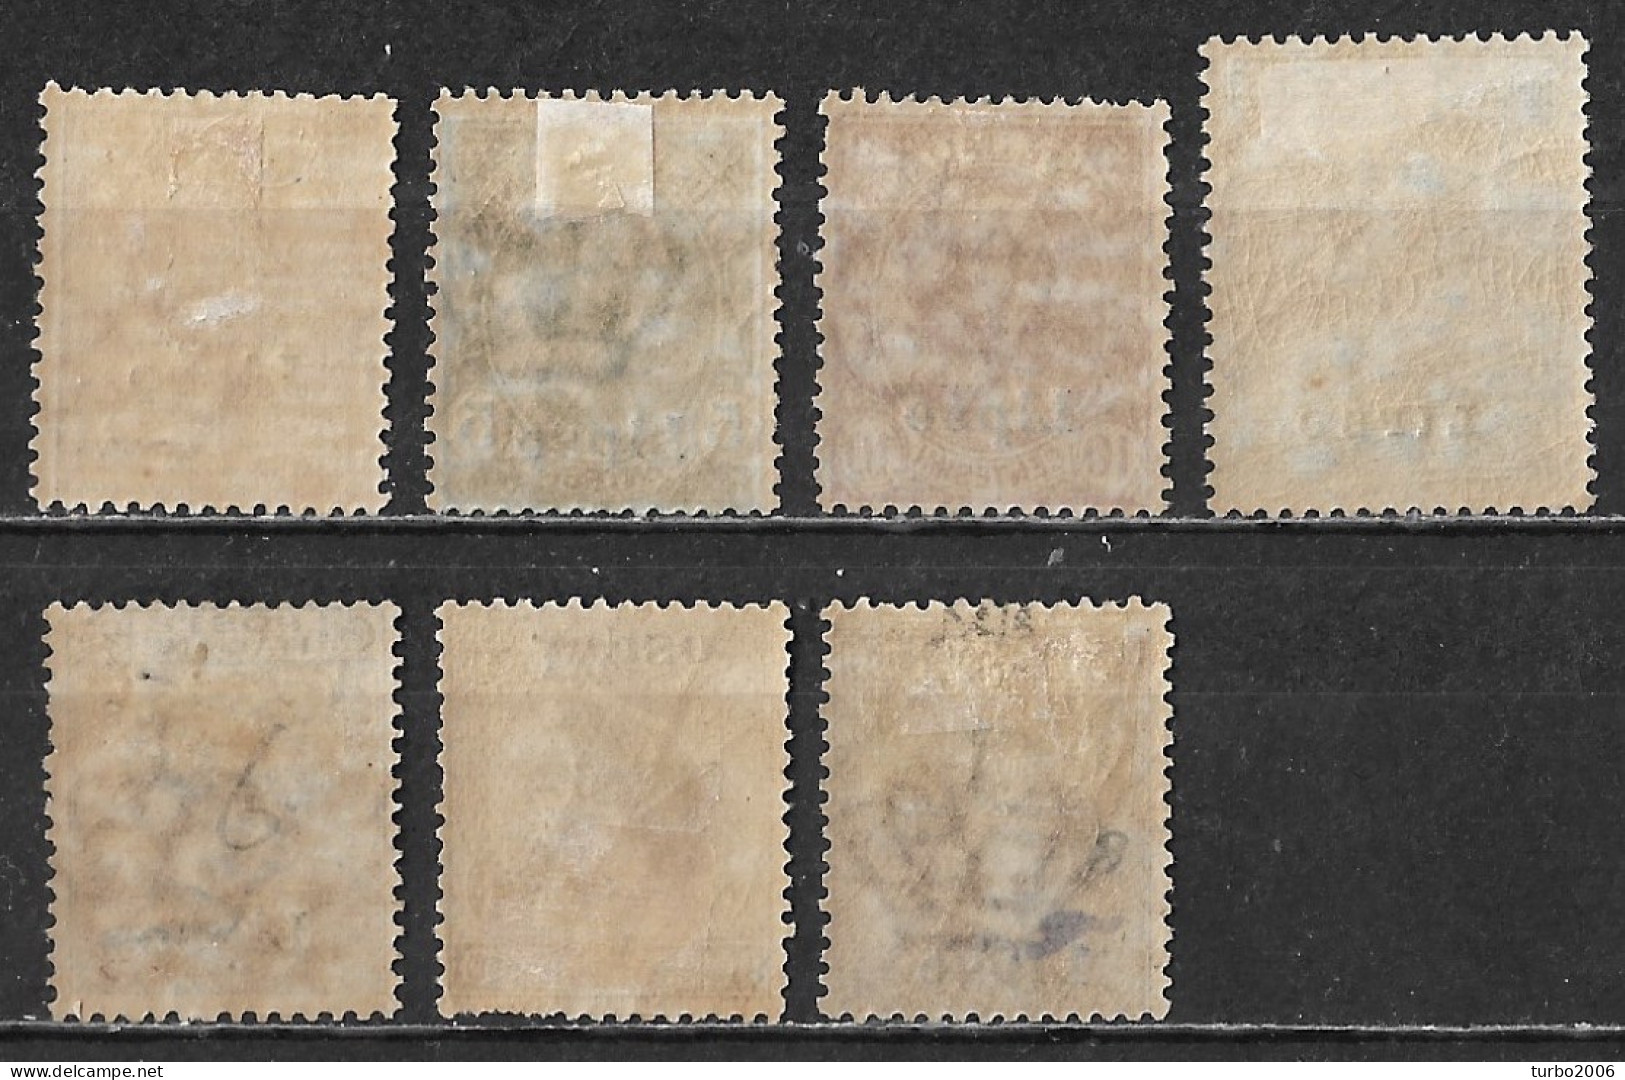 DODECANESE 1912 Italian Stamps With Black Overprint LIPSO Complete MH Set Vl. 1 / 7 - Dodecanese